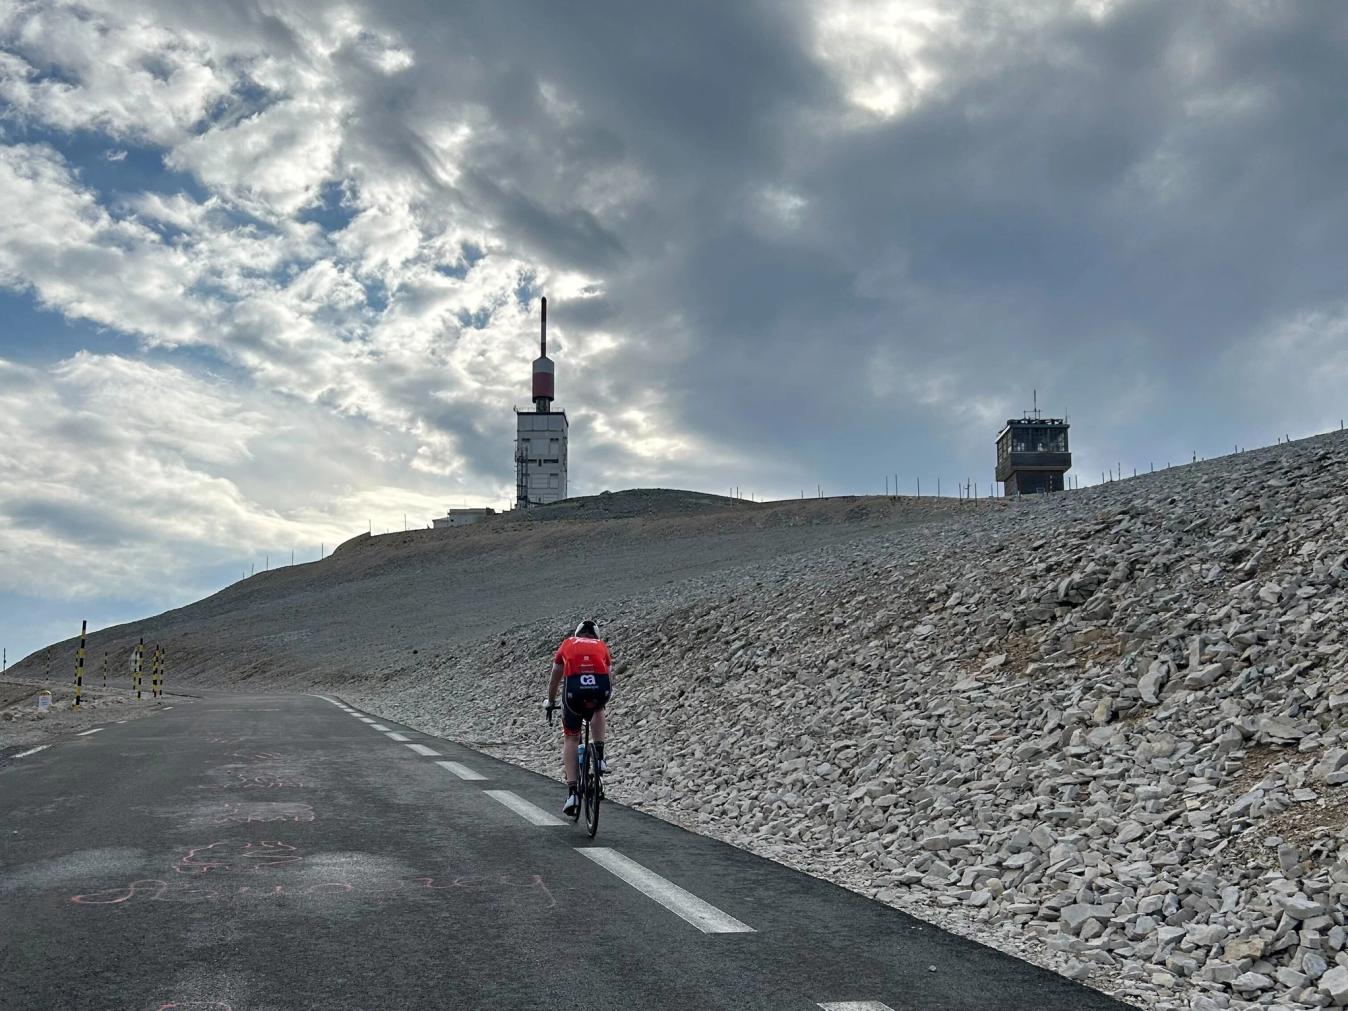 In complete contrast to what I had grown up watching at the Tour de France, there was barely a soul on the slopes of Mont Ventoux during my final ascent of the day